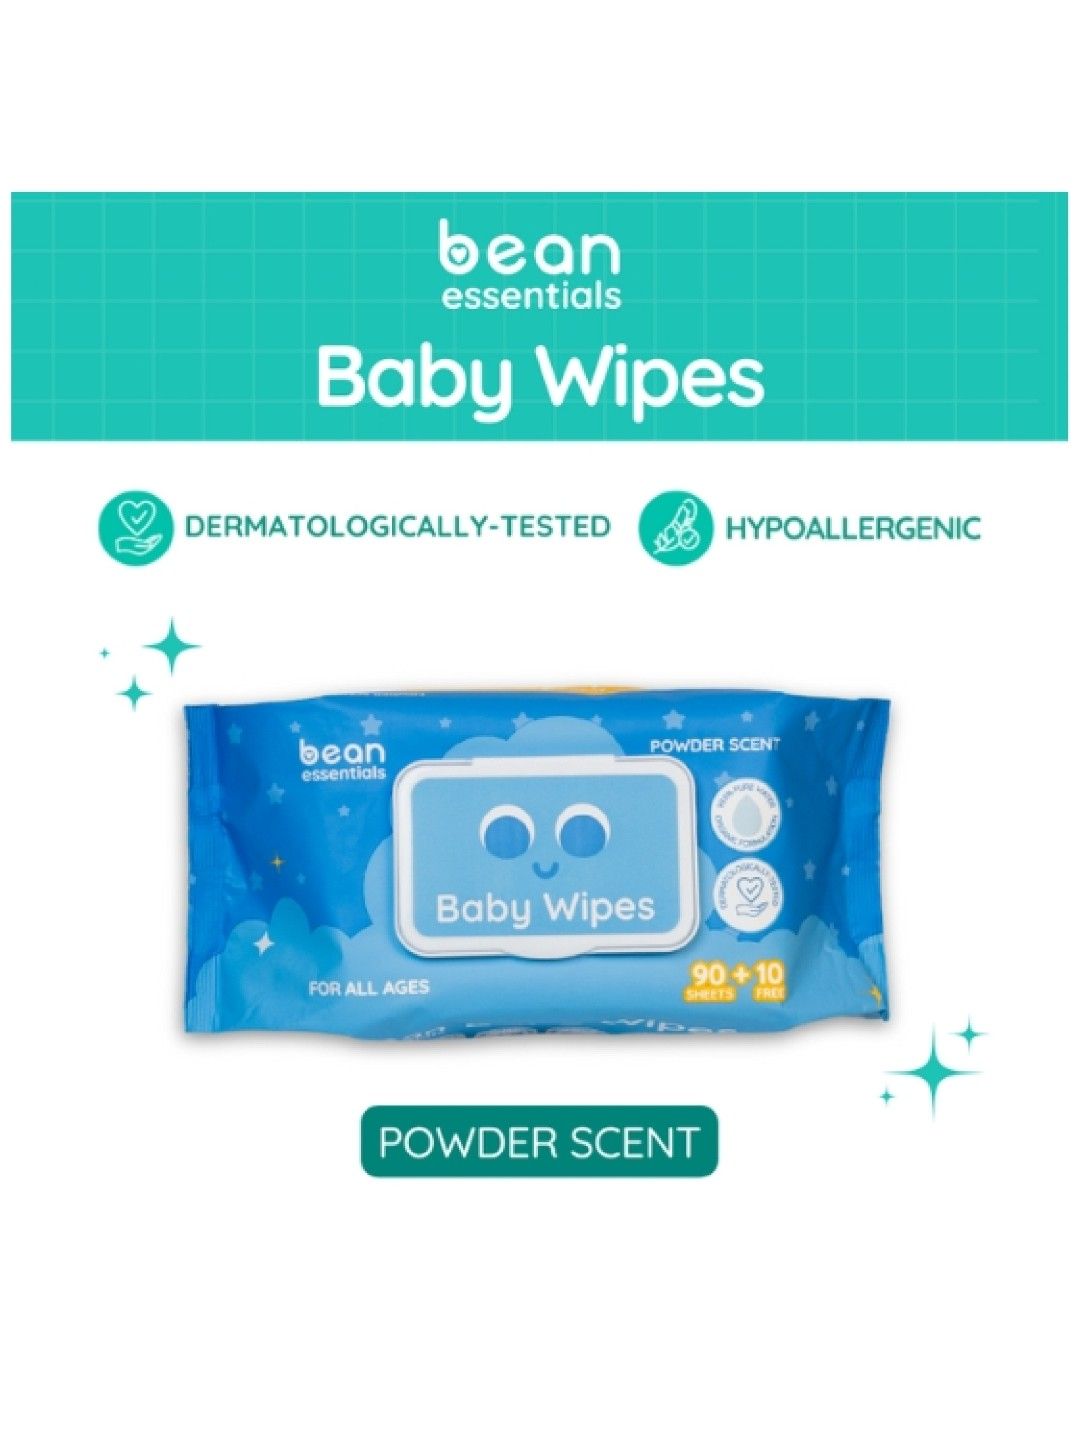 bean essentials Baby Wipes Powder Scent 100 sheets (No Color- Image 1)